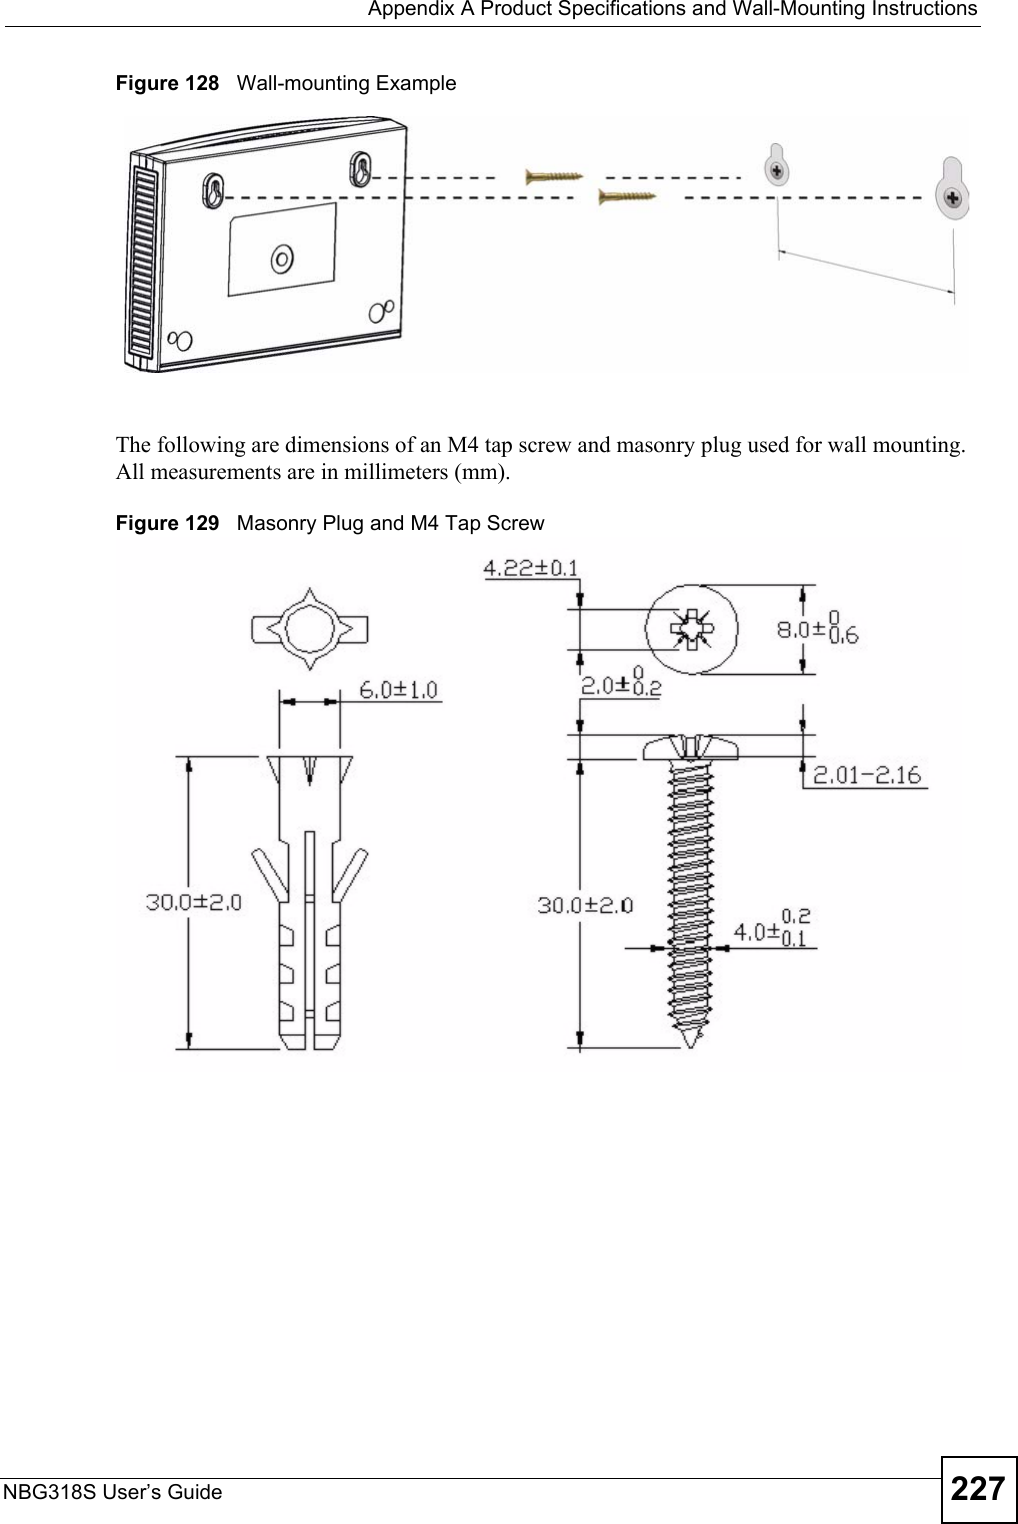  Appendix A Product Specifications and Wall-Mounting InstructionsNBG318S User’s Guide 227Figure 128   Wall-mounting ExampleThe following are dimensions of an M4 tap screw and masonry plug used for wall mounting. All measurements are in millimeters (mm). Figure 129   Masonry Plug and M4 Tap Screw